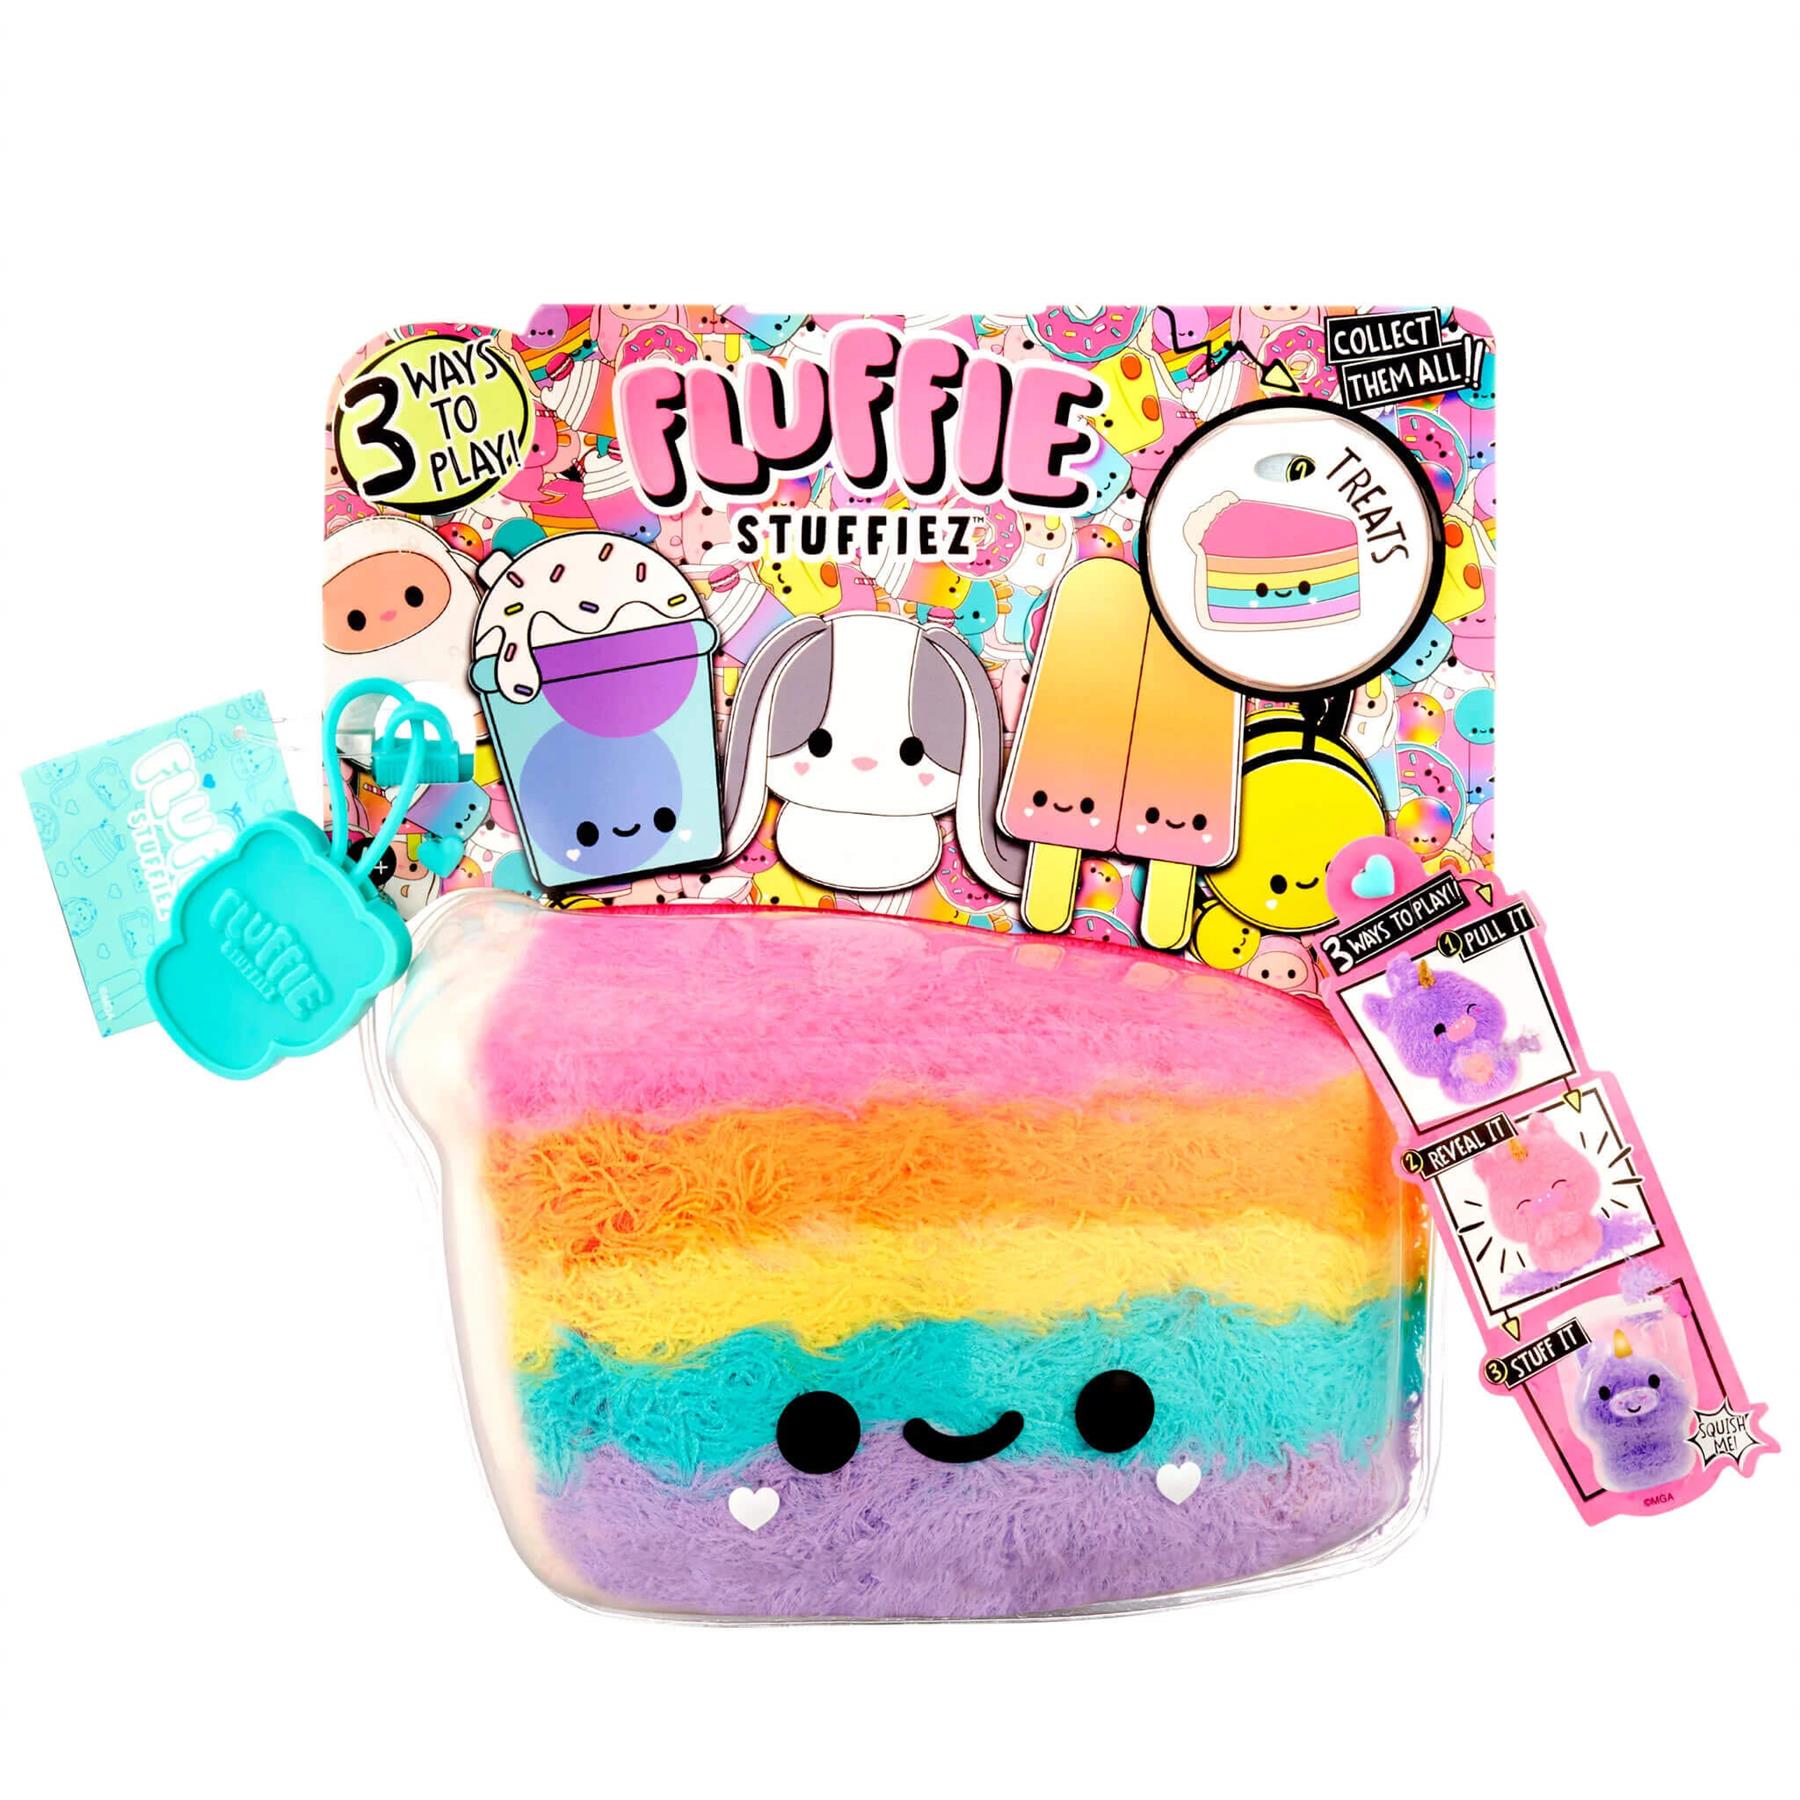 Fluffie Stuffiez Cake Small Collectable Feature Plush